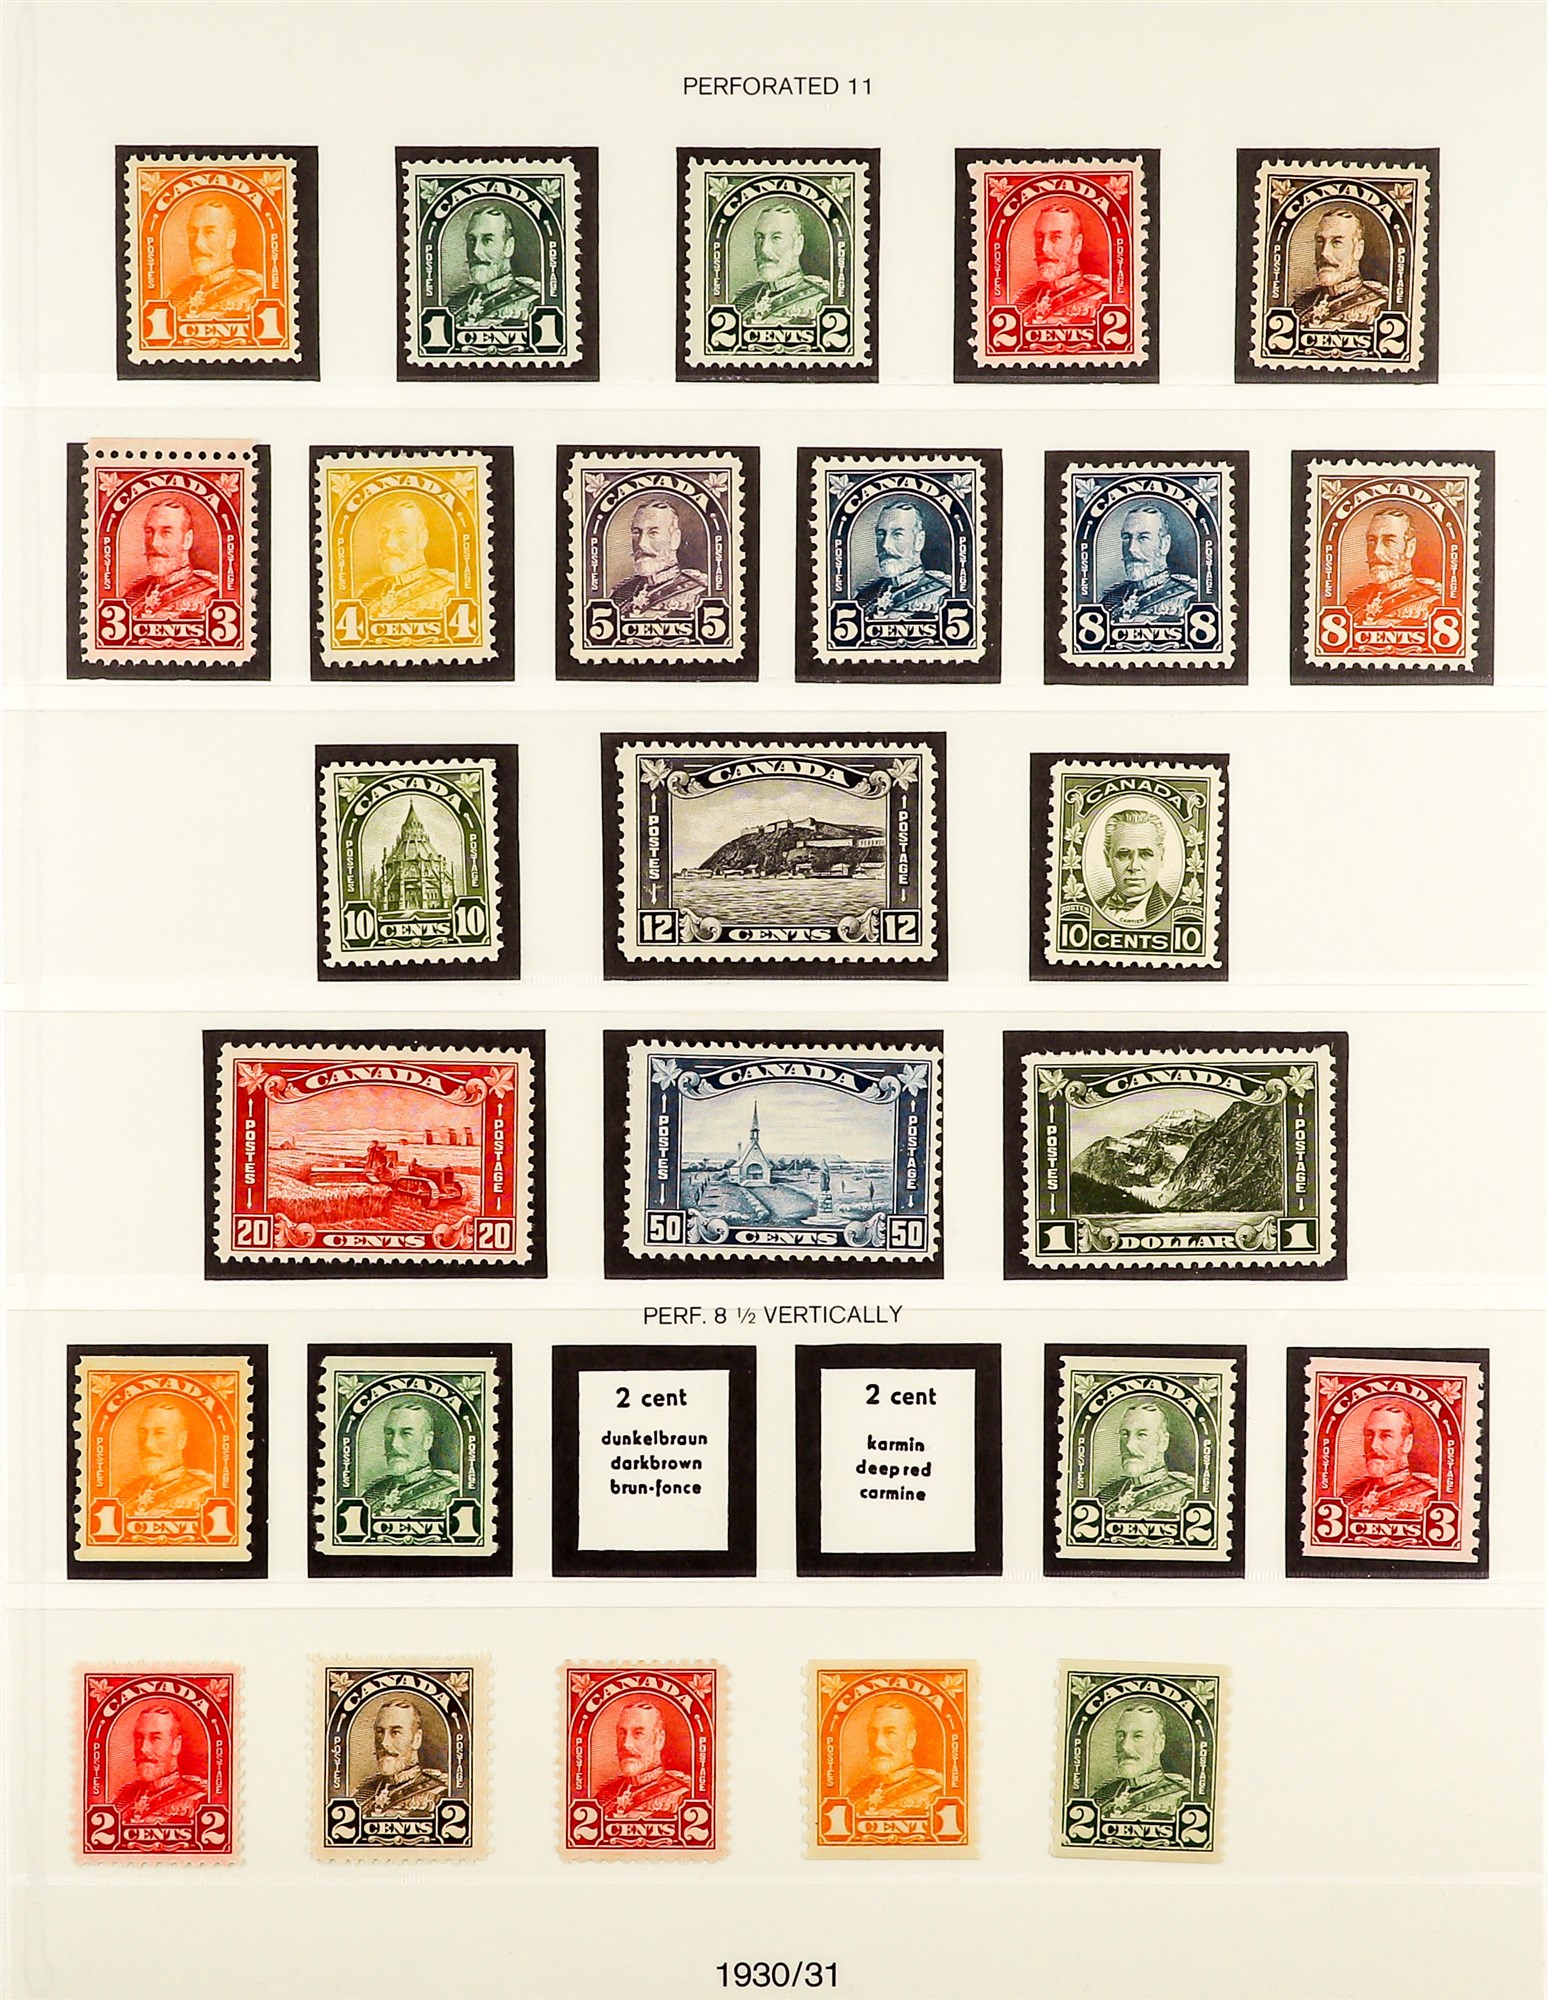 CANADA 1911 - 1936 MINT / NEVER HINGED MINT COLLECTION of around 150 stamps on hingeless pages, - Image 6 of 9